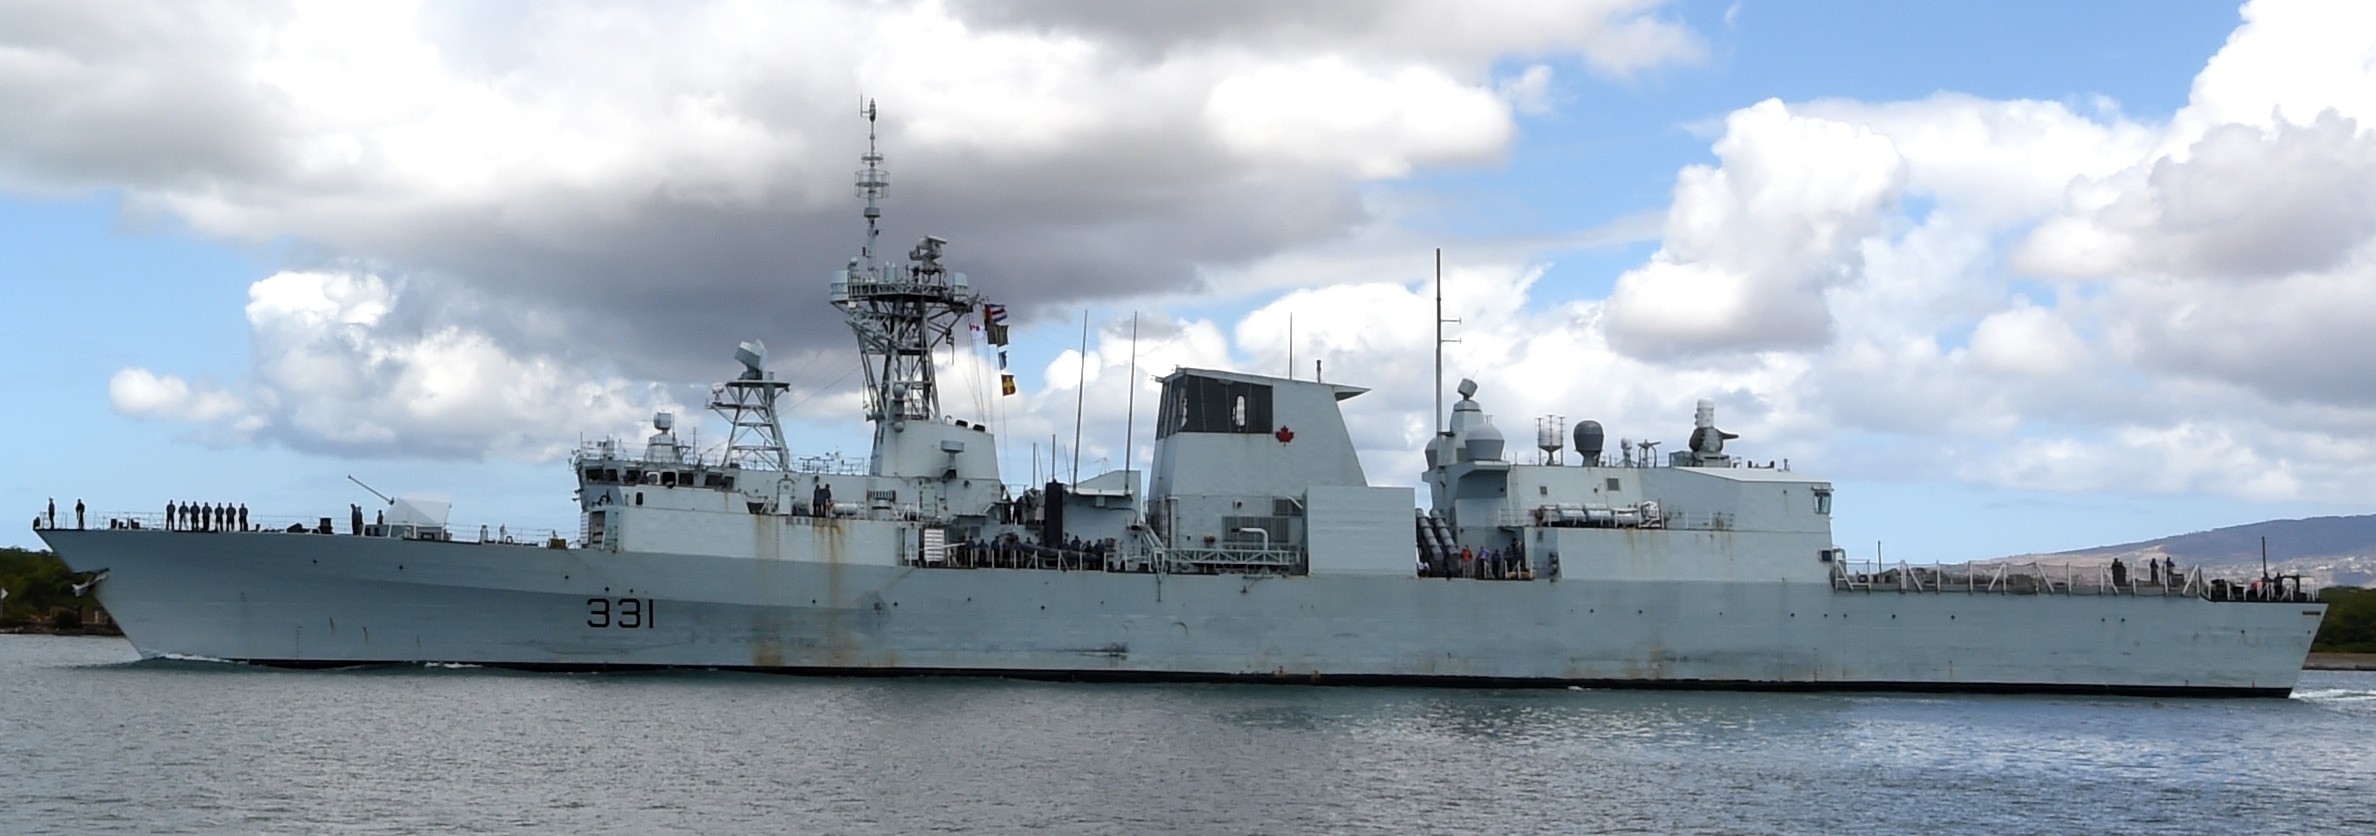 ffh-331 hmcs vancouver halifax class helicopter patrol frigate ncsm royal canadian navy 30